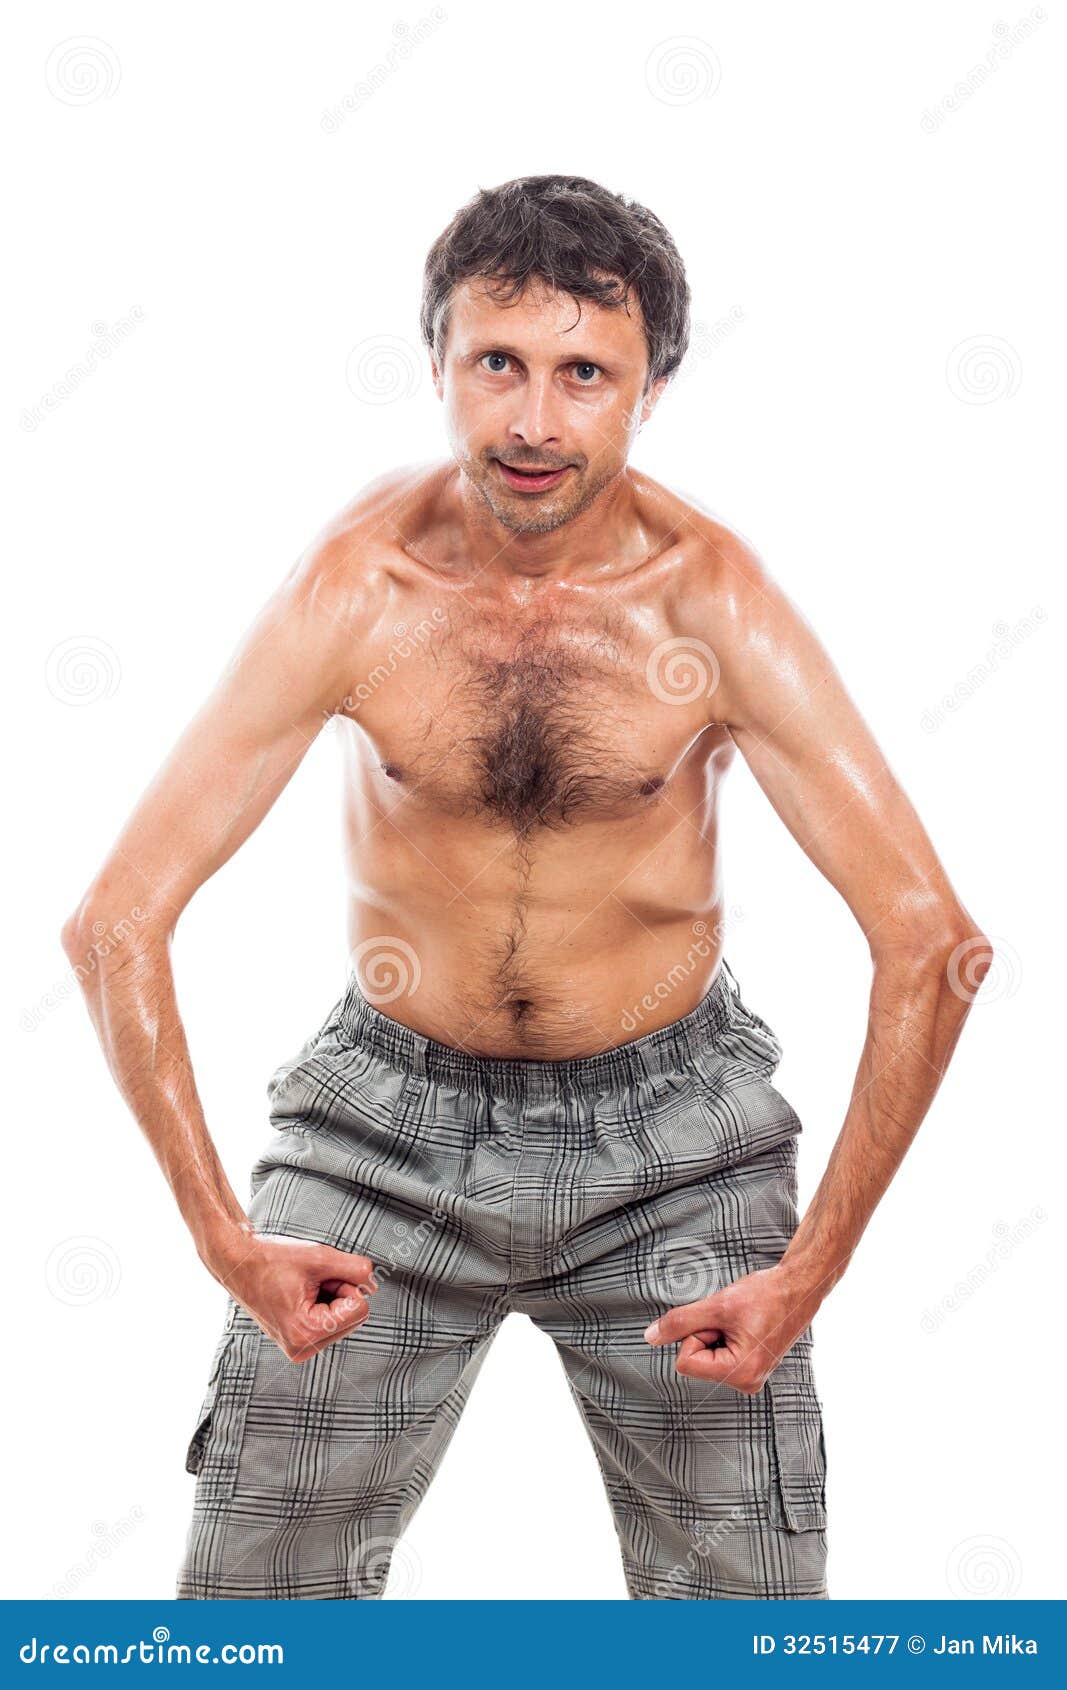 funny-man-posing-shirtless-showing-his-body-isolated-white-background-32515477.jpg